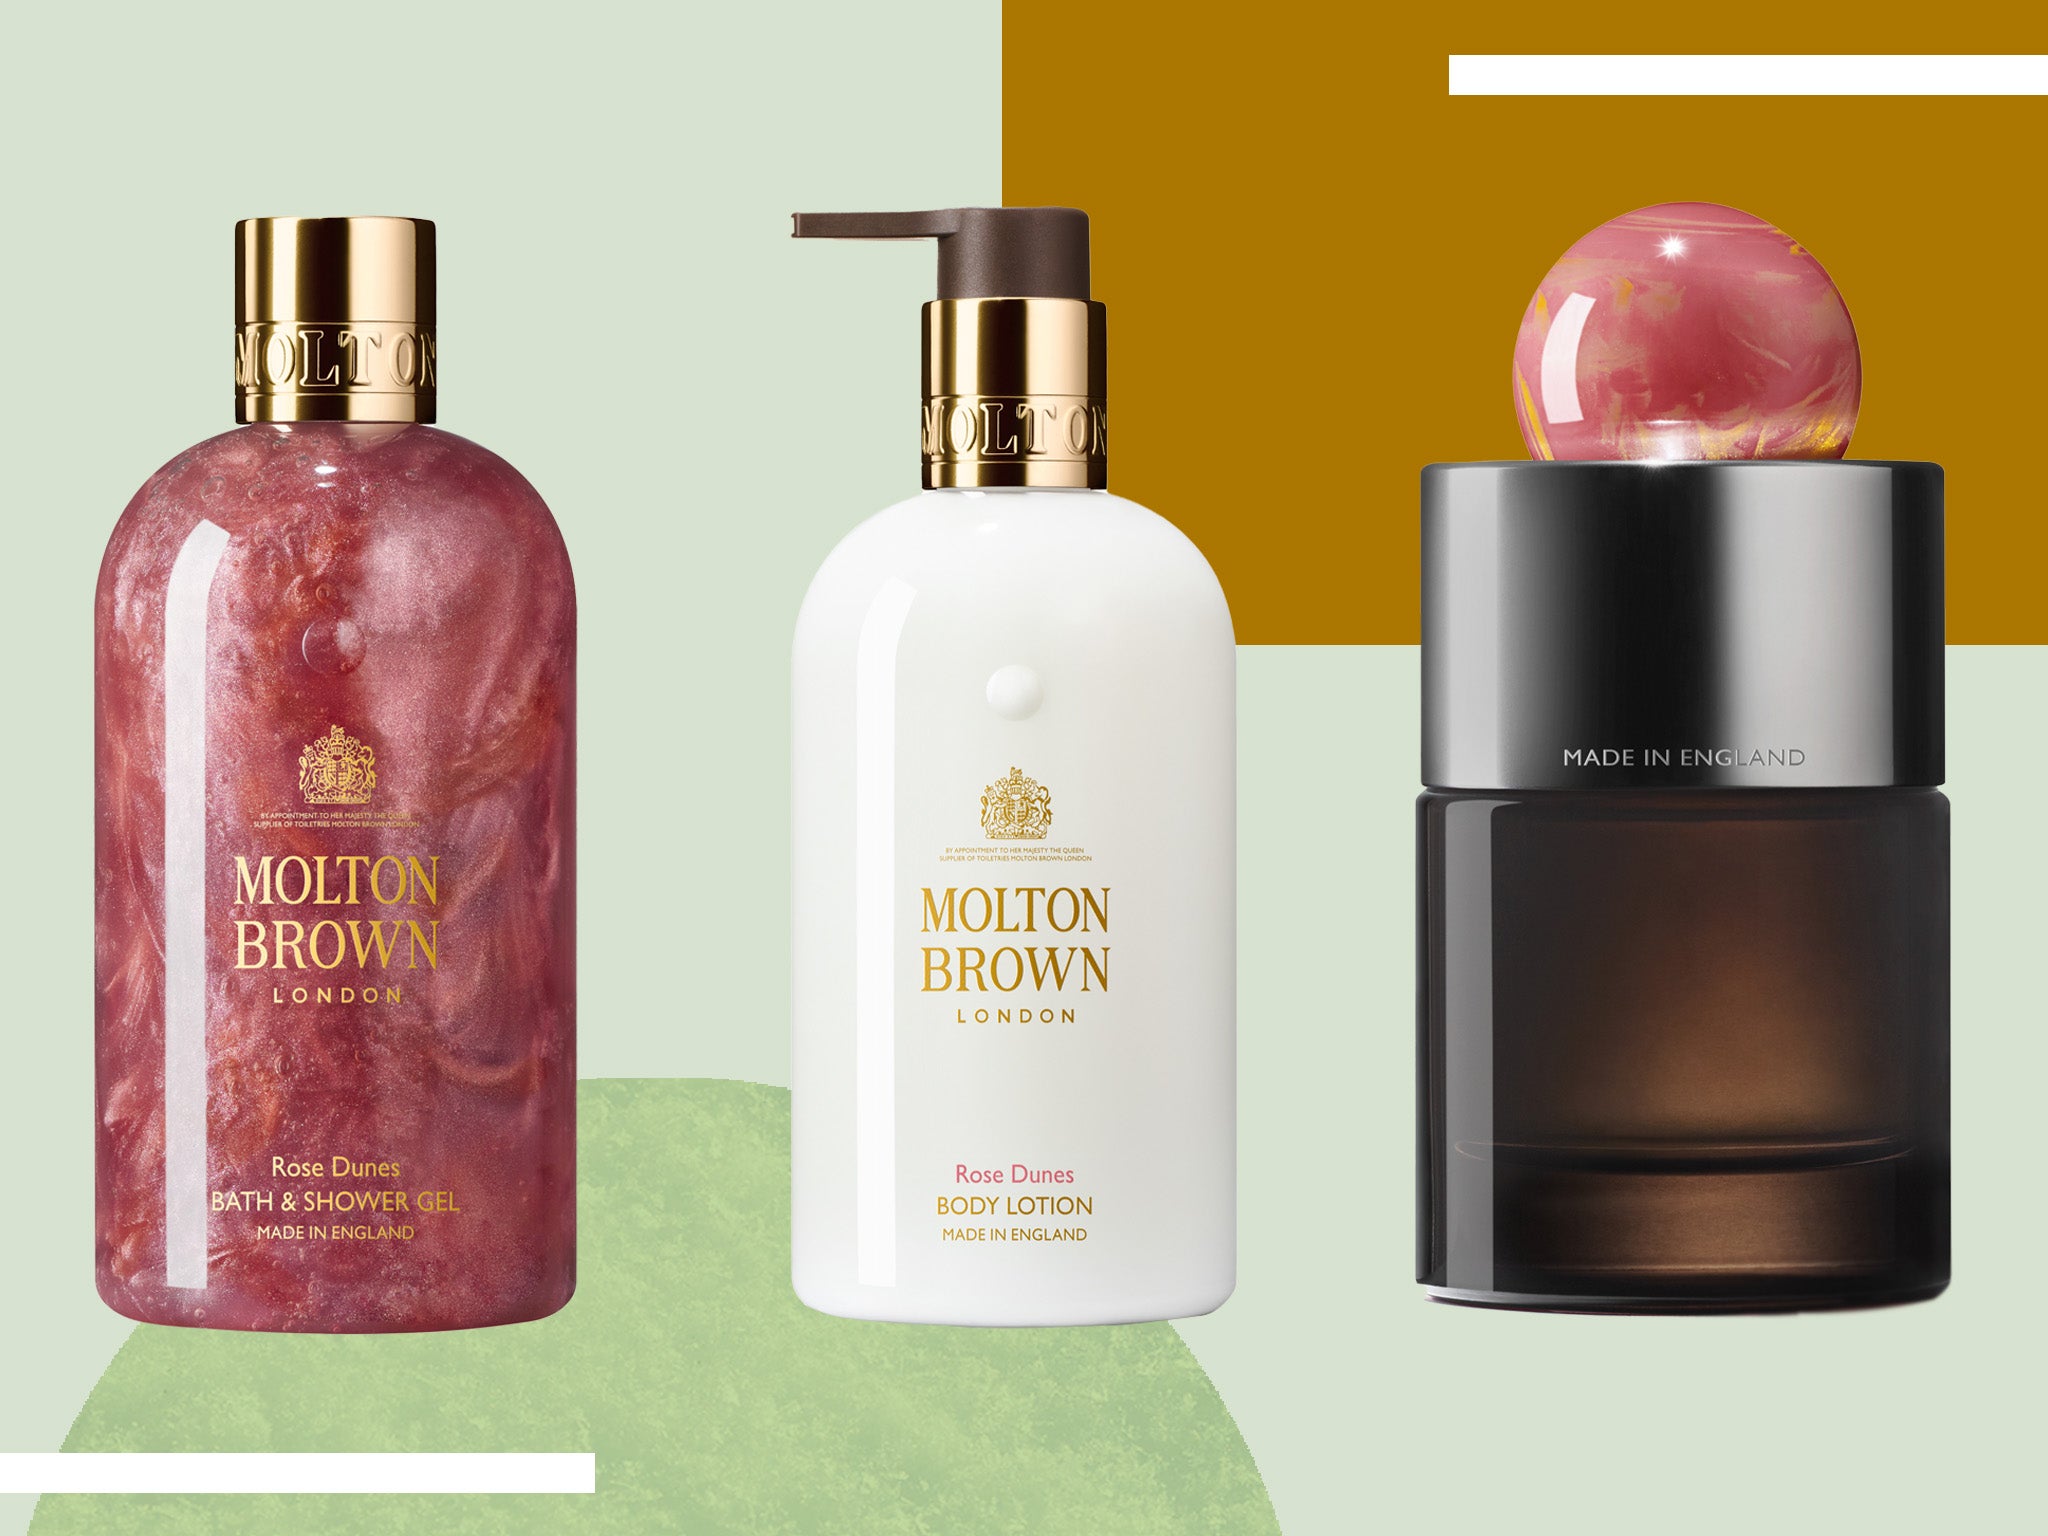 Molton Brown's rose dunes range includes perfume, bath and shower